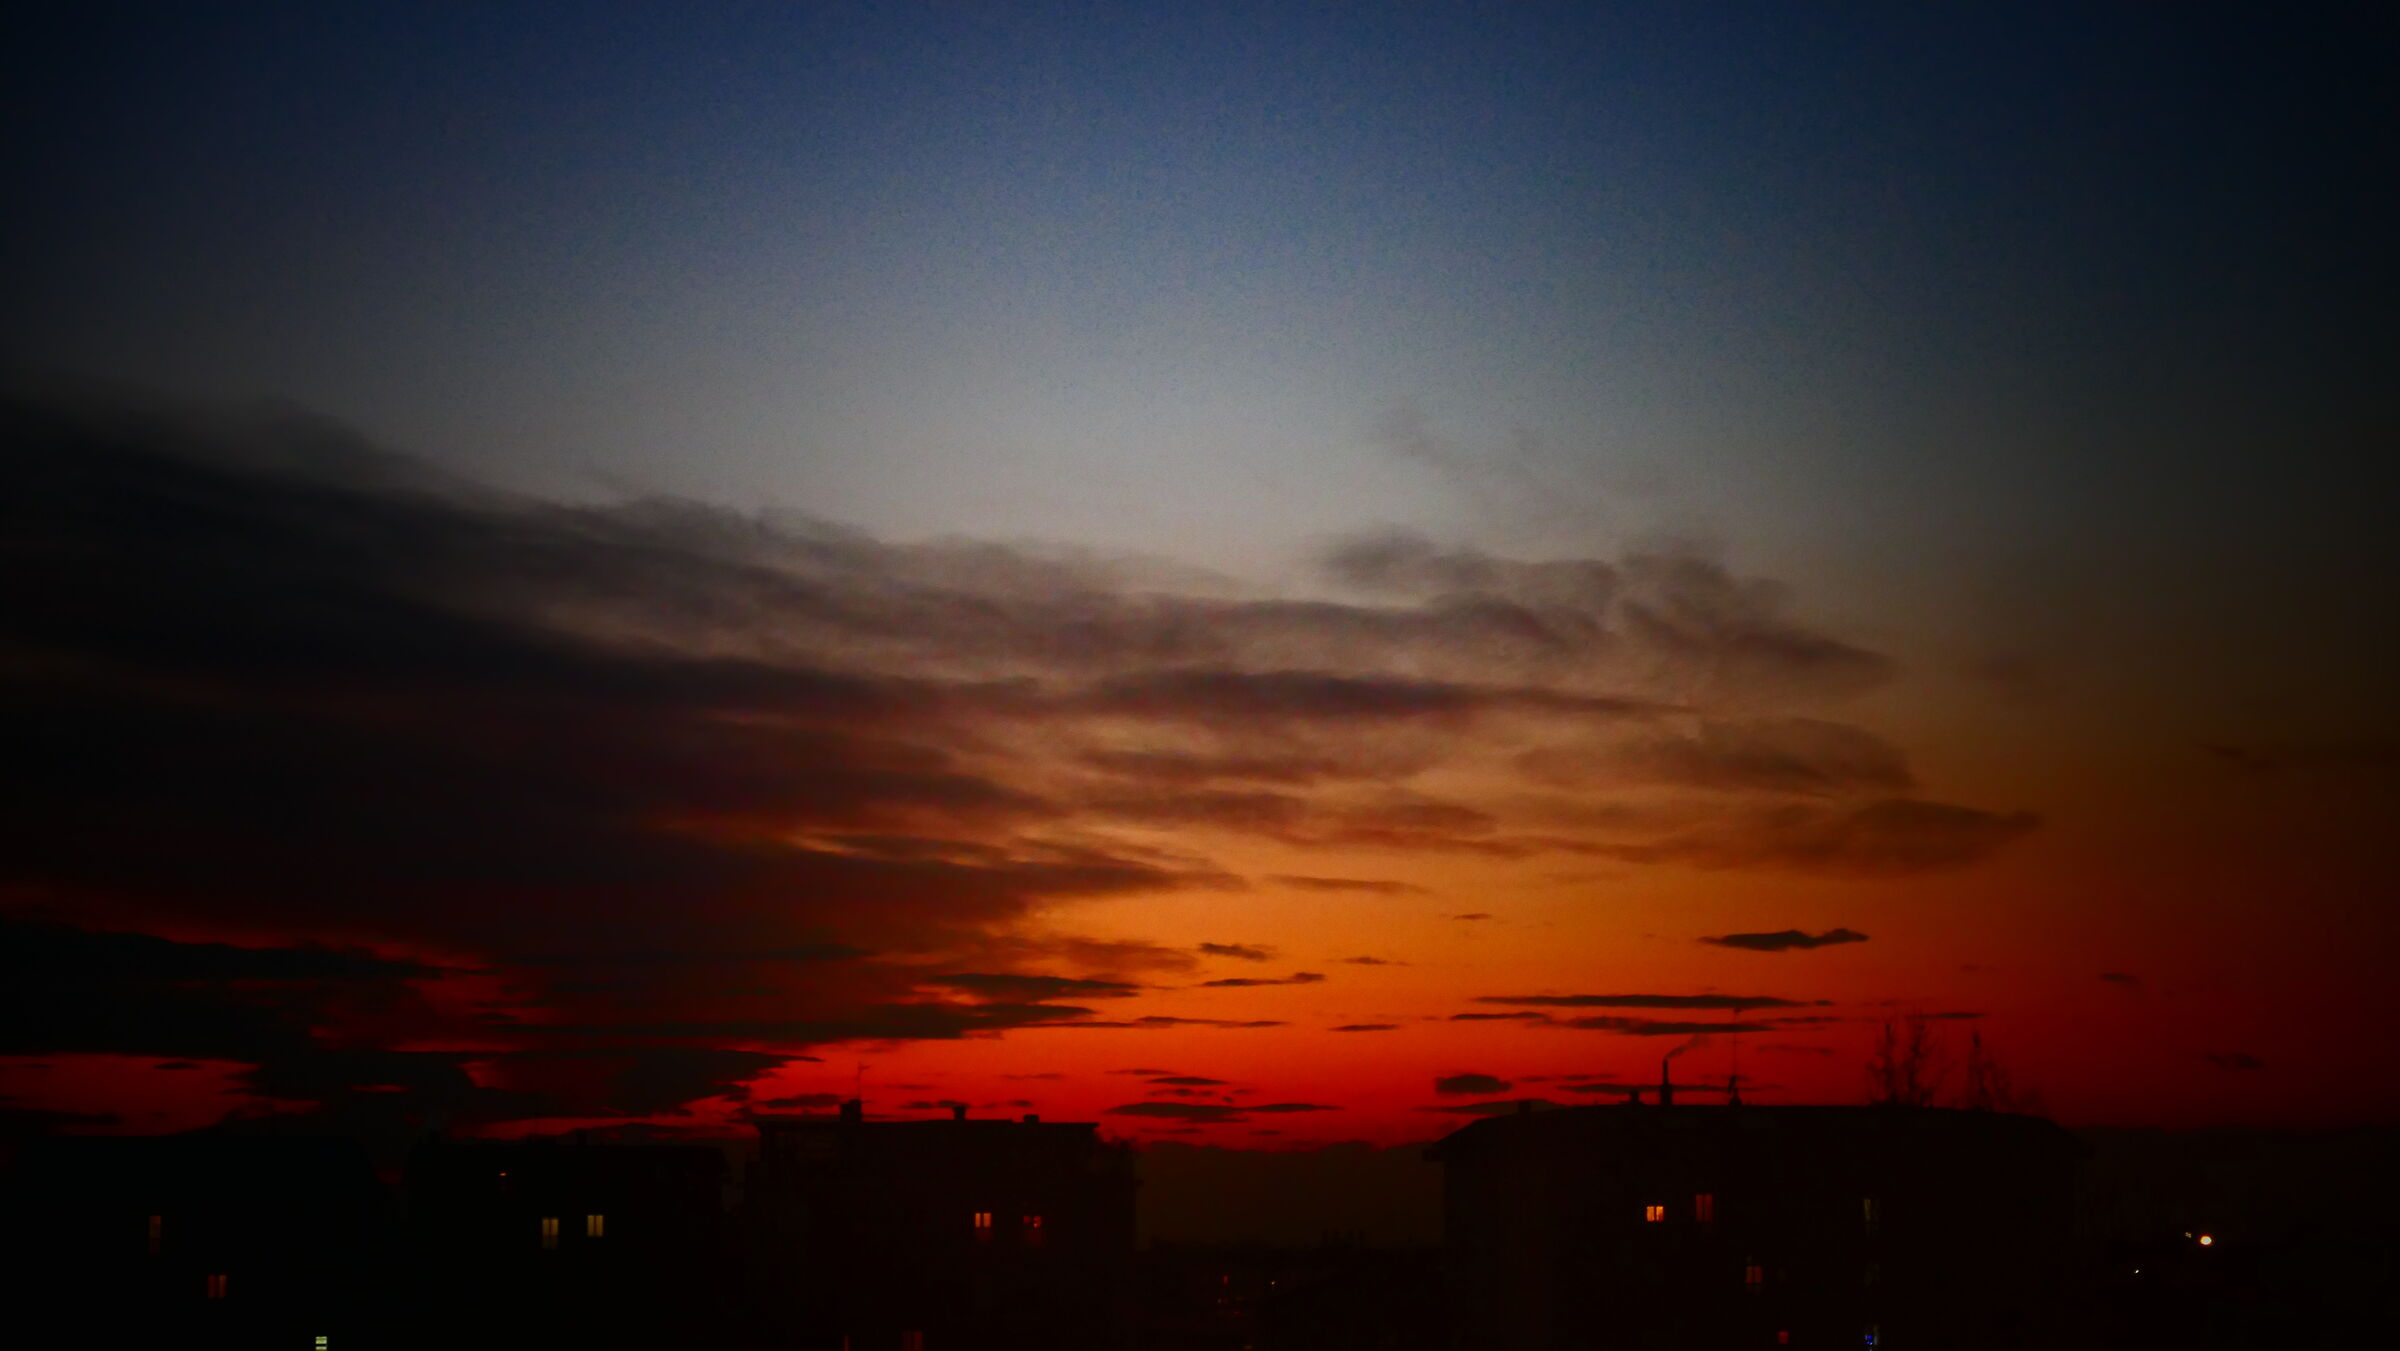 Sunset from the balcony (stay at home)...